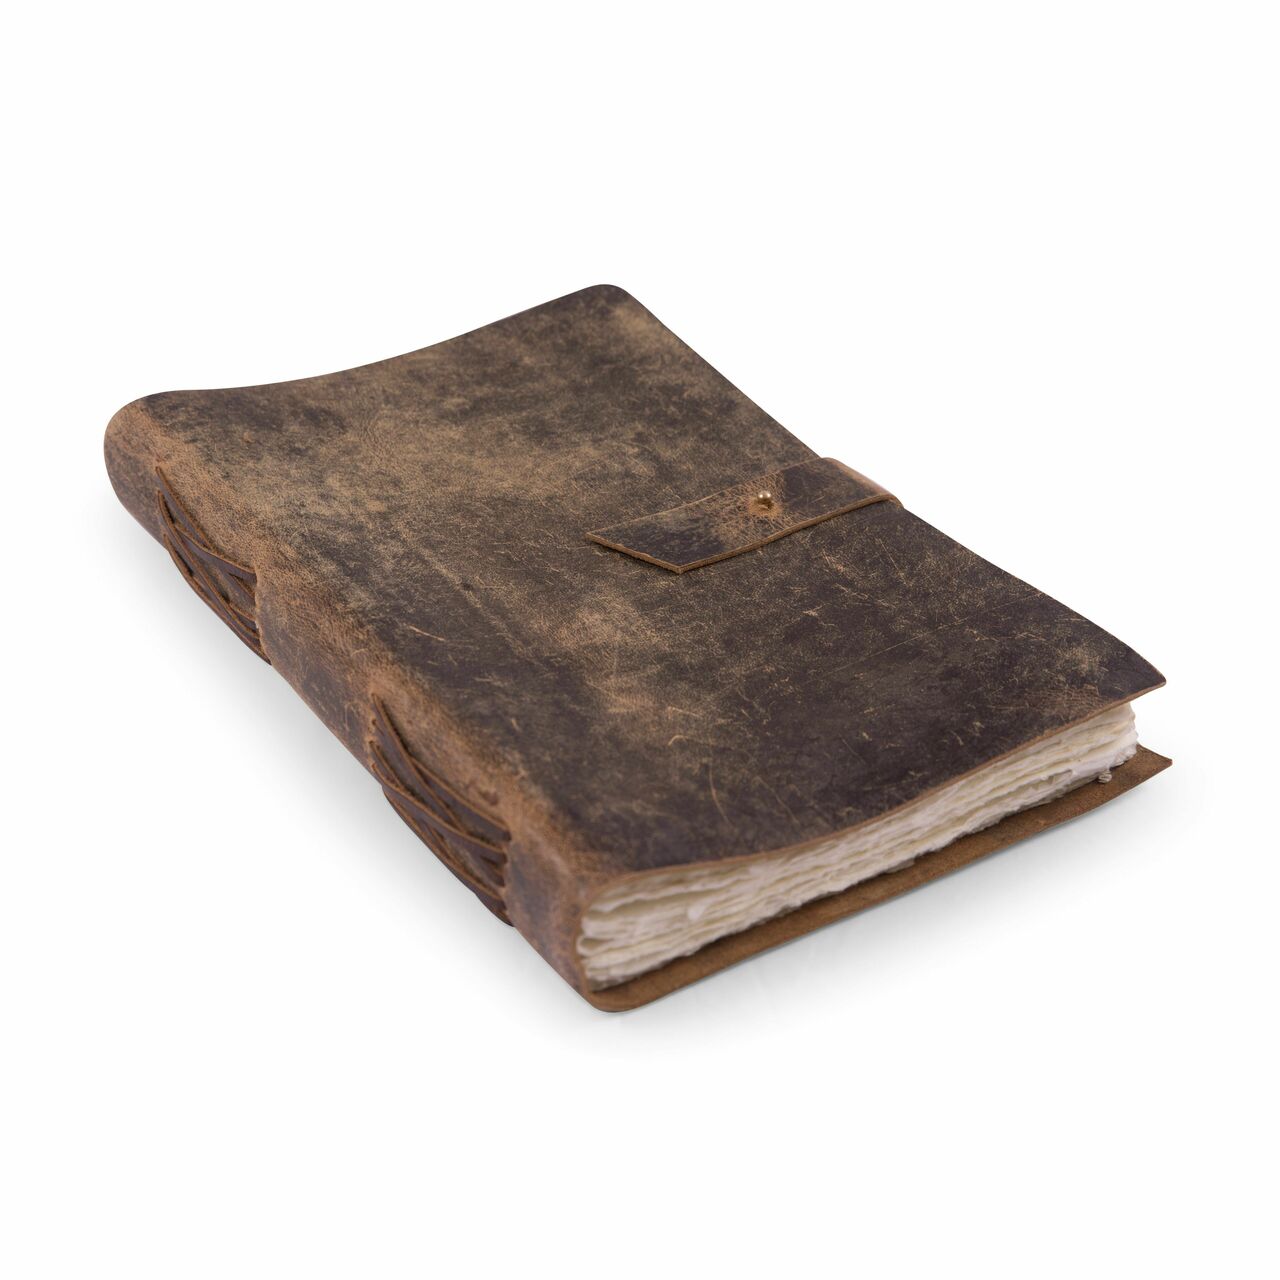 LARGE DISTRESSED LEATHER JOURNAL